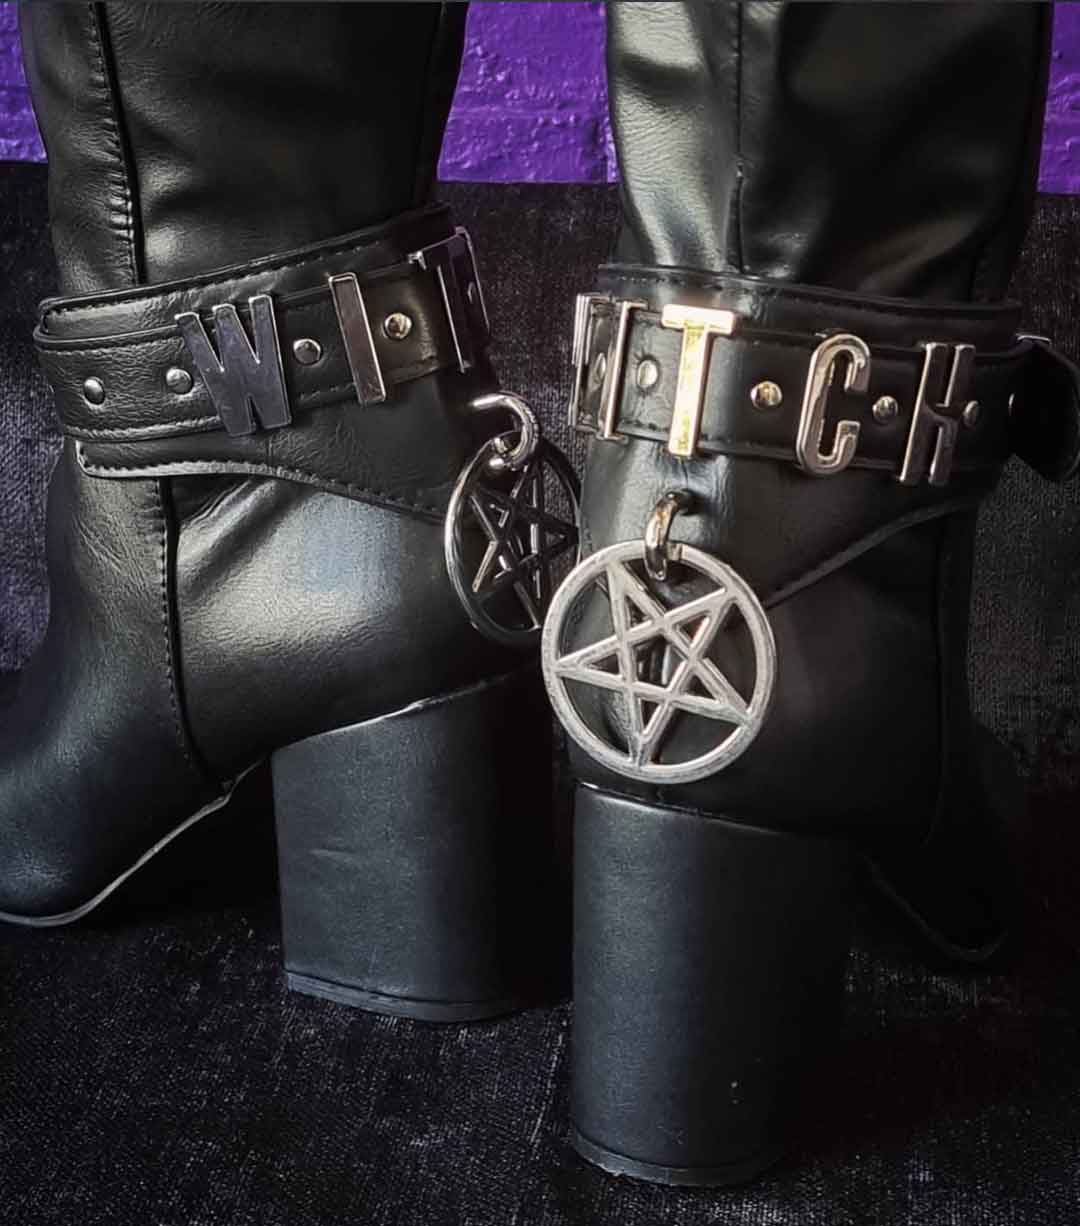 Witch boot ornaments with pentagrams